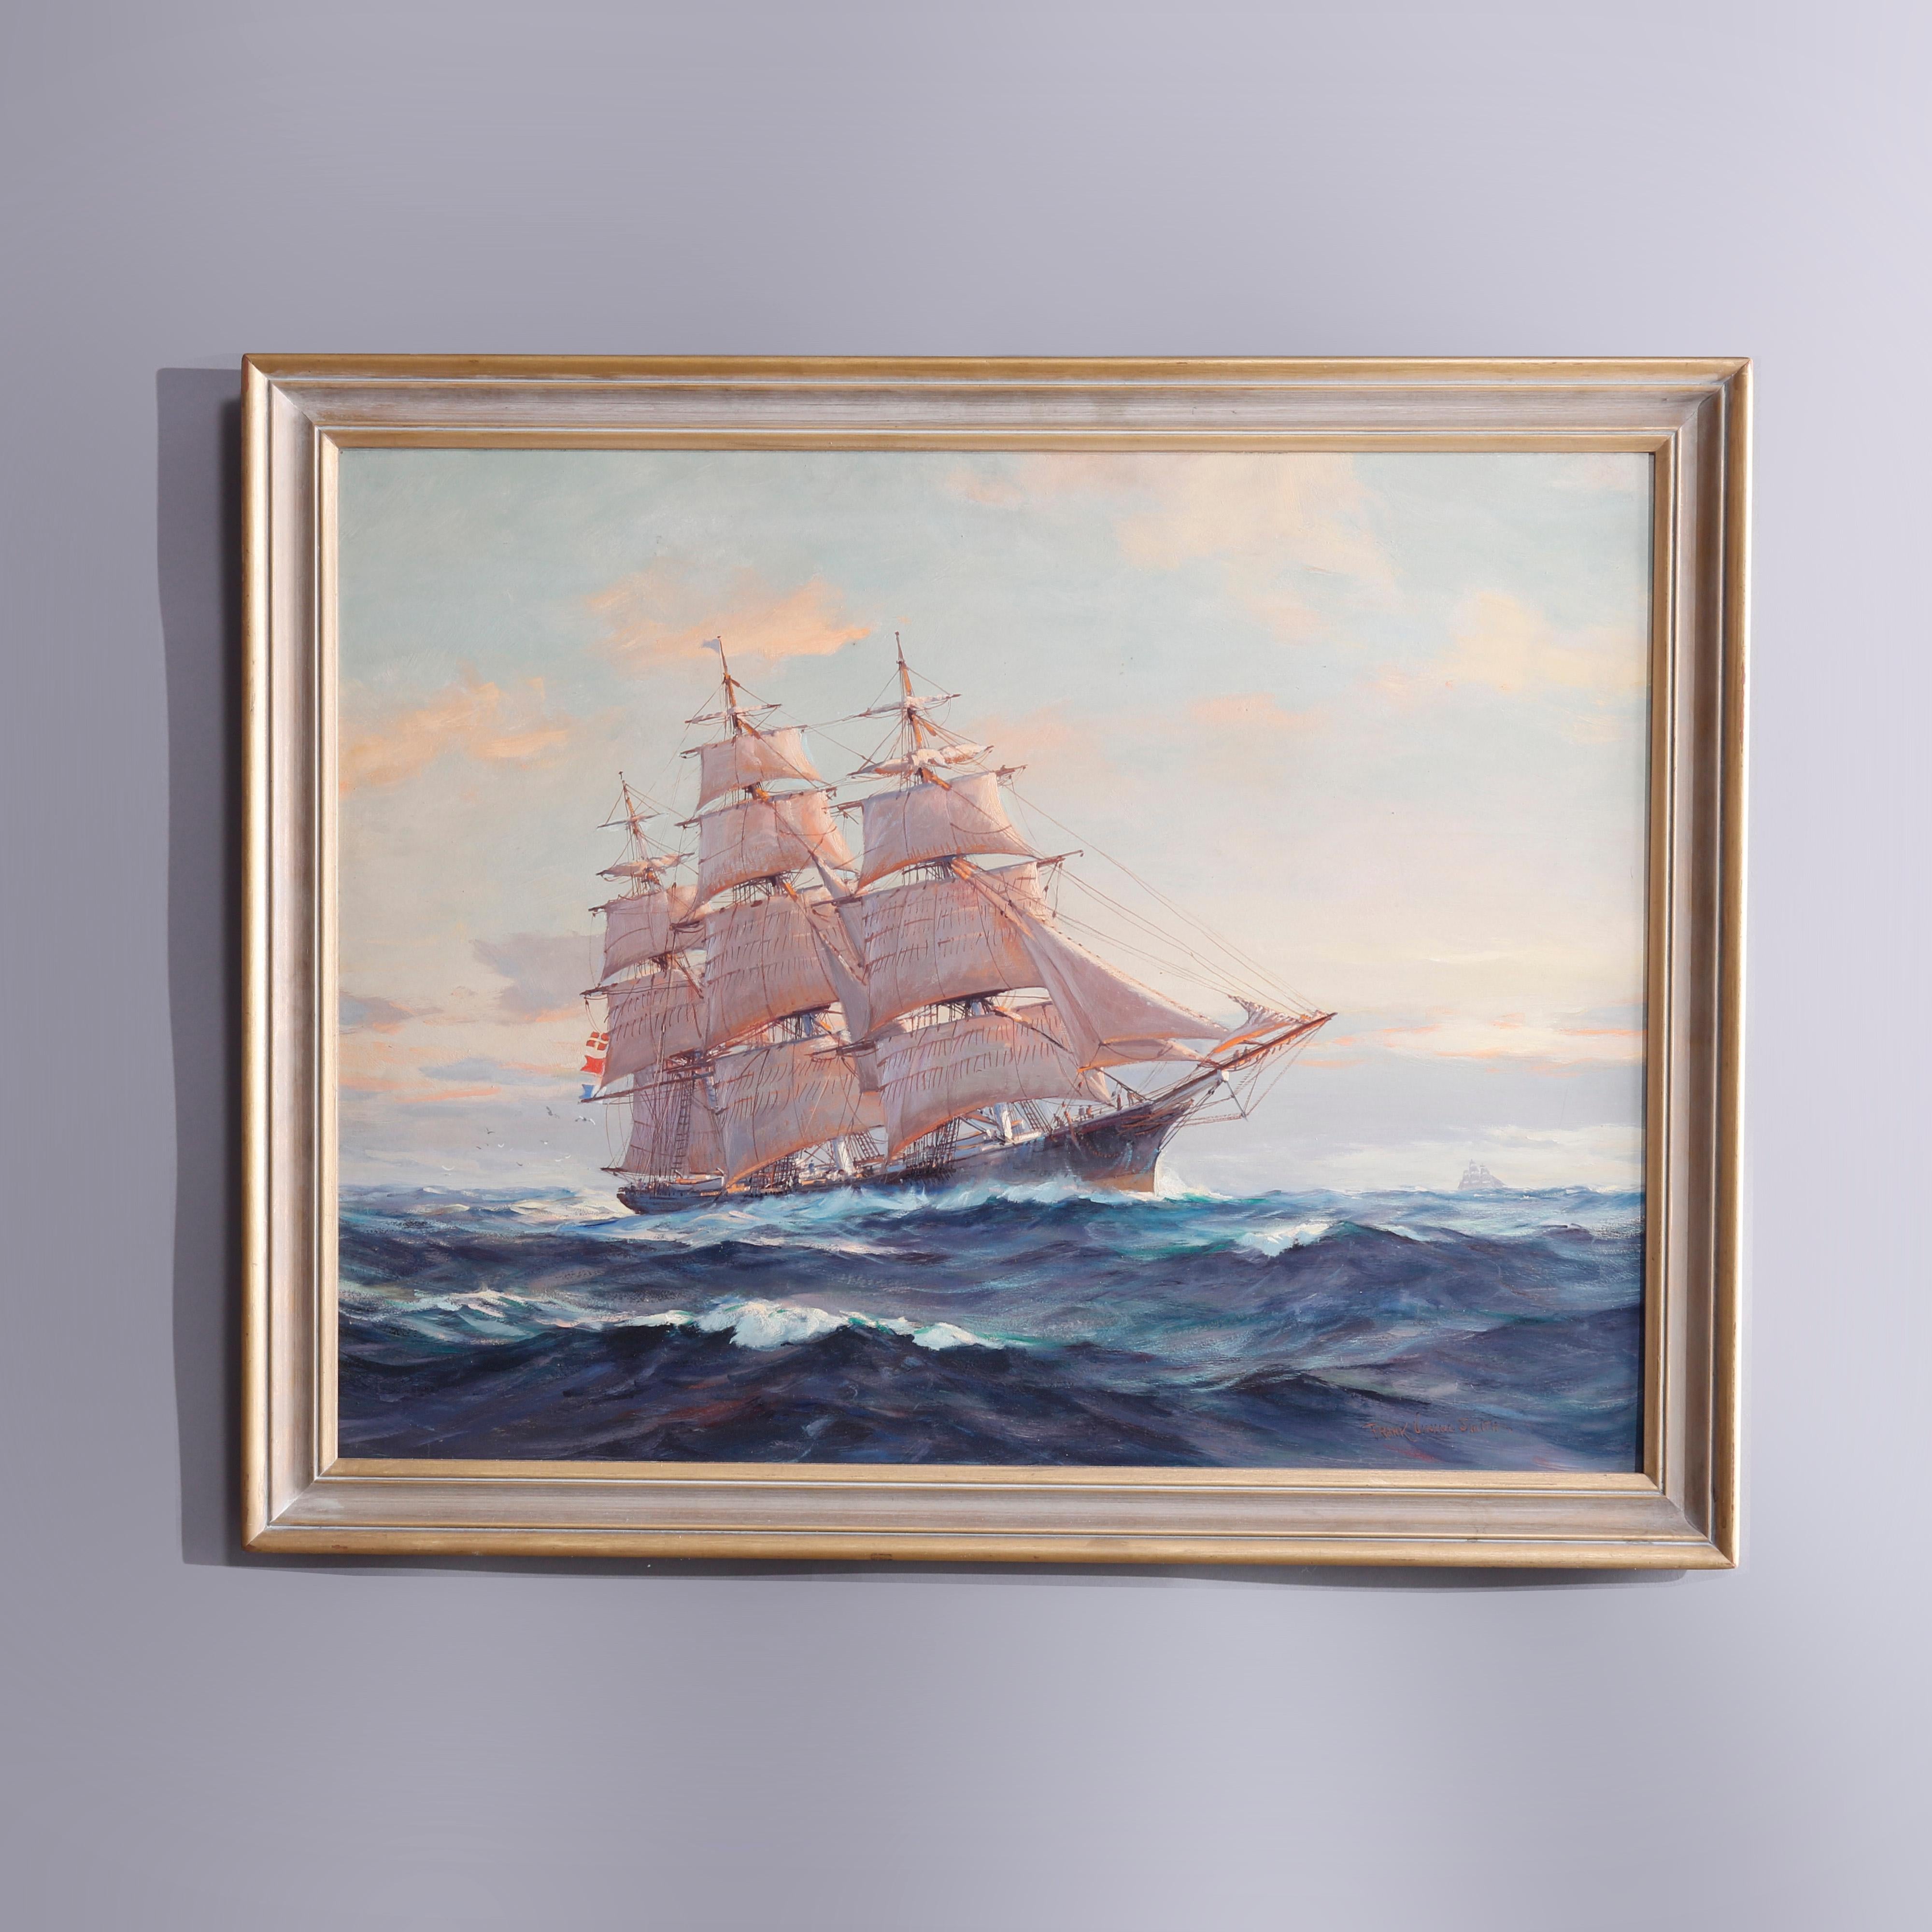 A maritime painting offers oil on board seascape with a tall mast ship titled “Stag Hound”, signed lower right, seated in wood frame, en verso label, c1940

Measures - 34'' H x 27.5'' W x 1.5'' D.

Additional information:
Frank Vining Smith